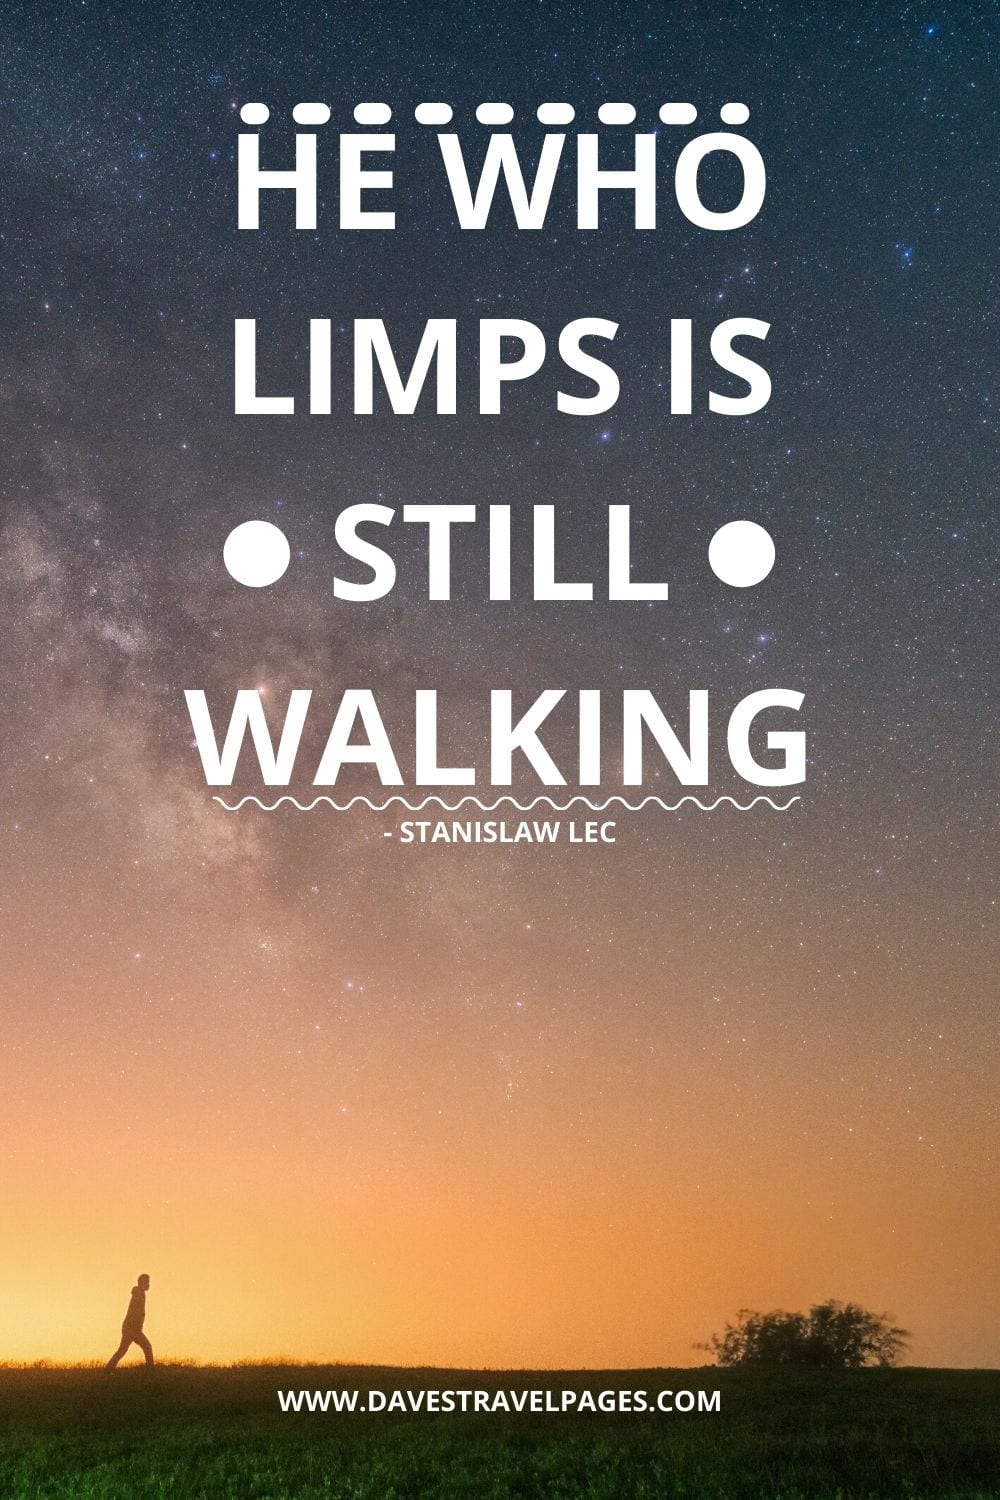 Motivational Quotes: He who limps is still walking - Stanislaw Lec